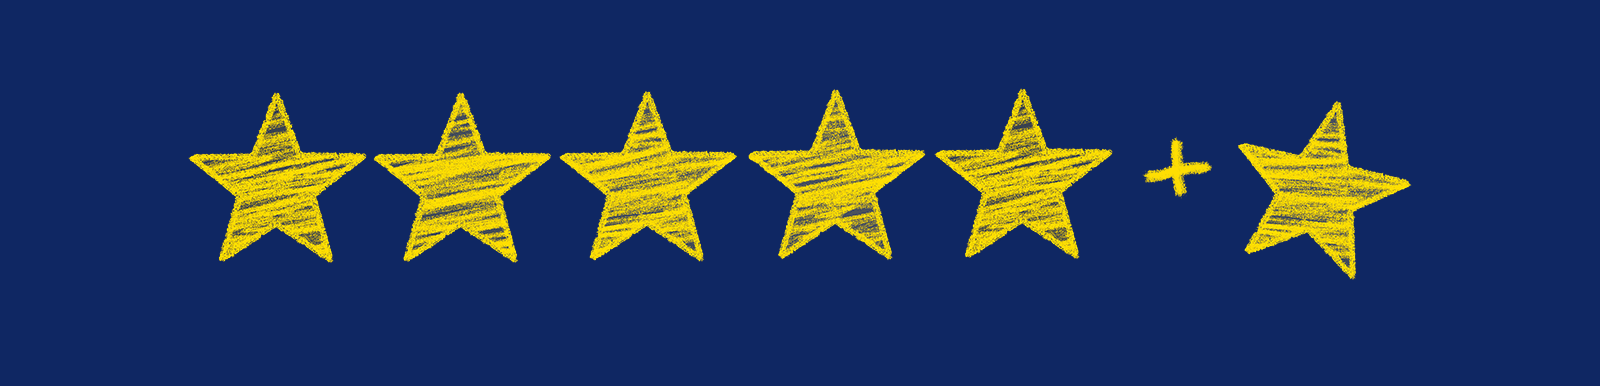 Banner with five stars, a plus sign, and one extra star